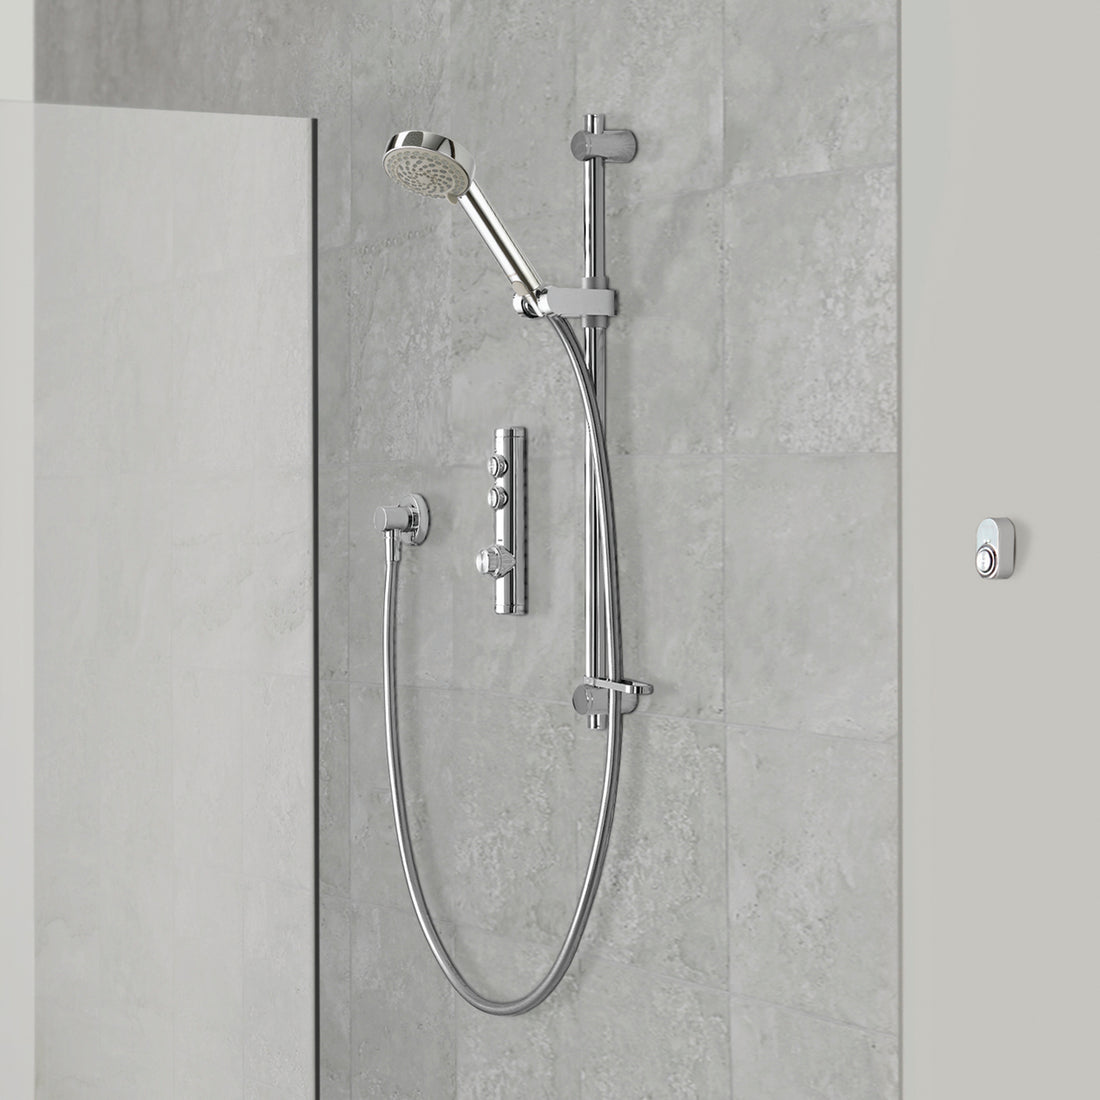 Aqualisa Isystem Smart Shower - Concealed With Adjustable Head against light grey wall panel ISD.A1.BV.21